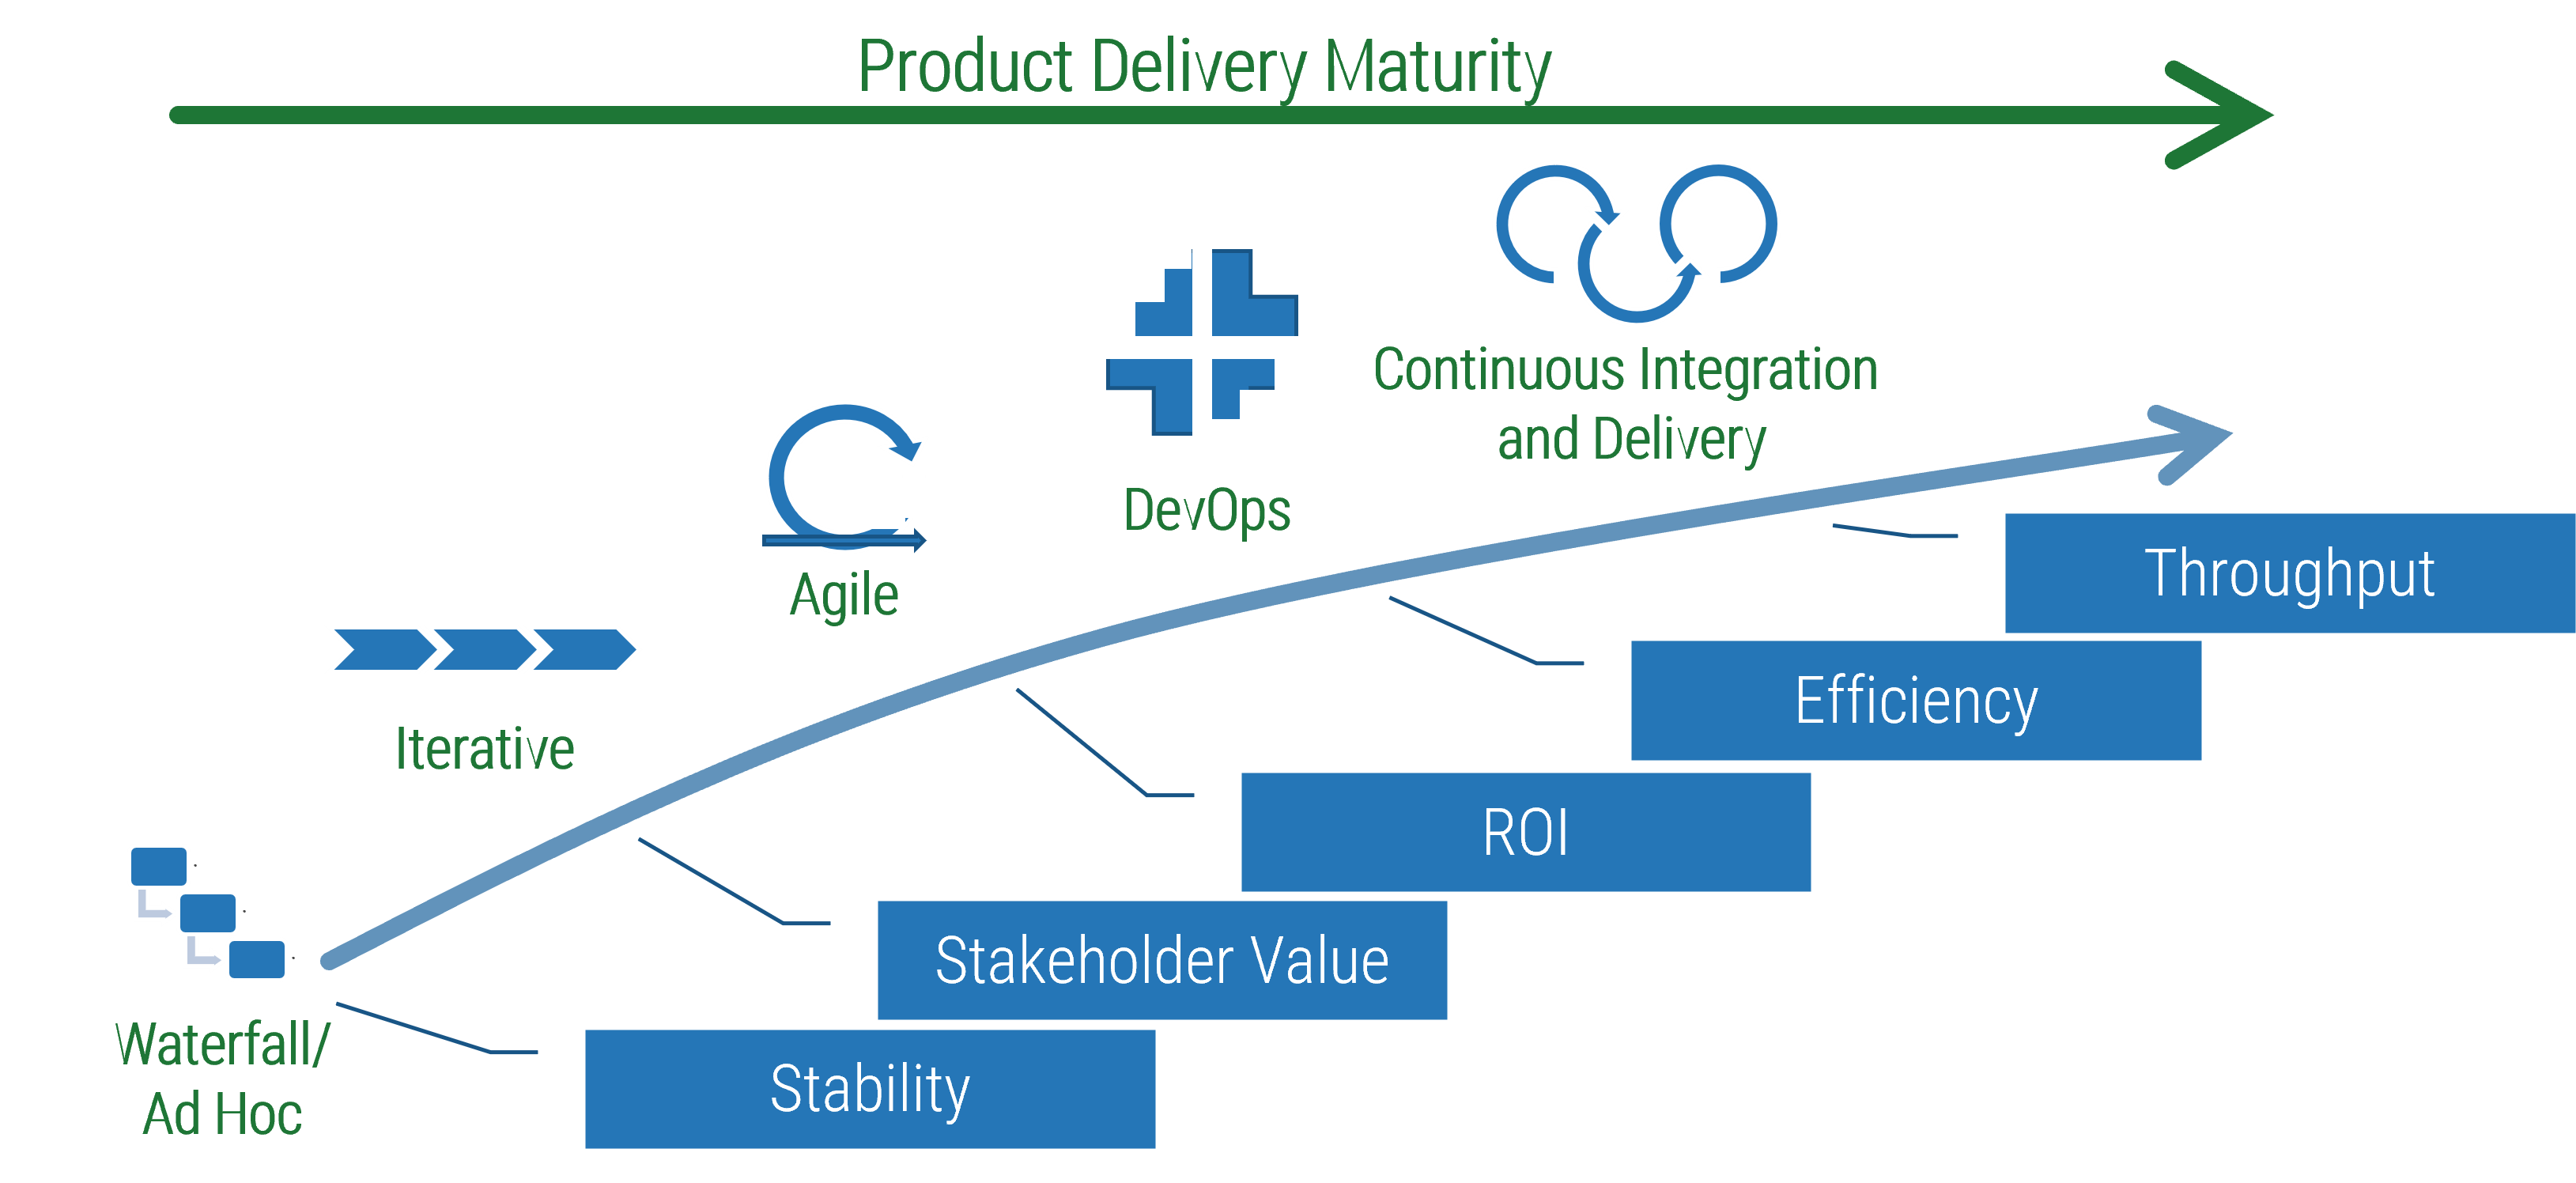 This image shows the product delivery maturity process from waterfall to continuous integration and delivery.